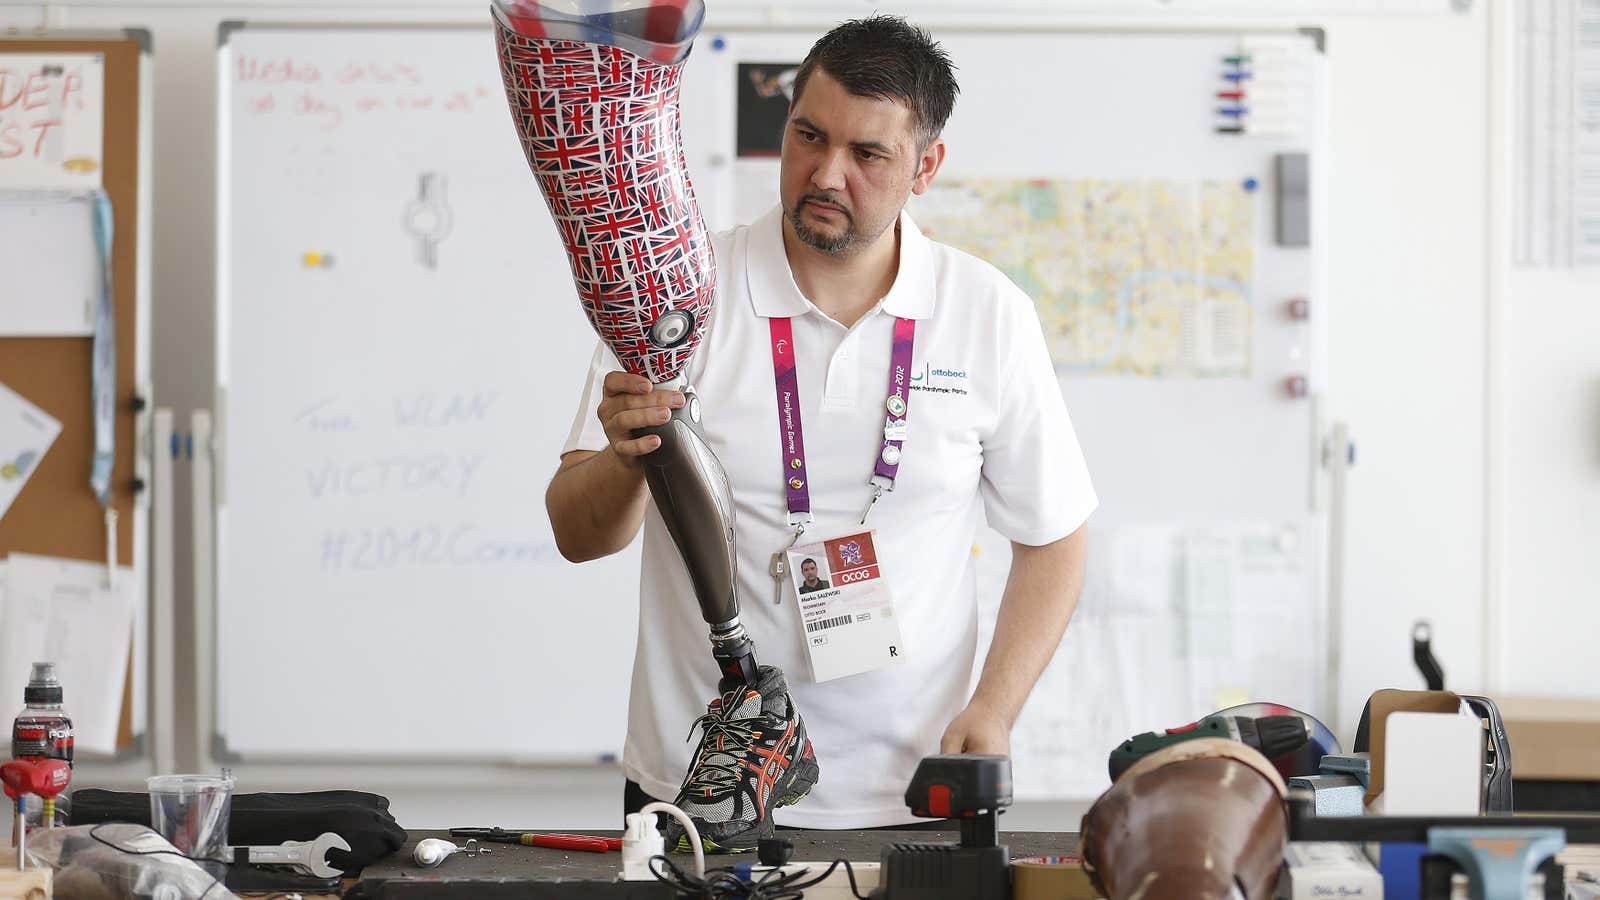 A technician works on a prosthetic leg for Britain’s discus thrower Darren Derenalagi in Ottobock’s workshop at the London Paralympic Games in 2012